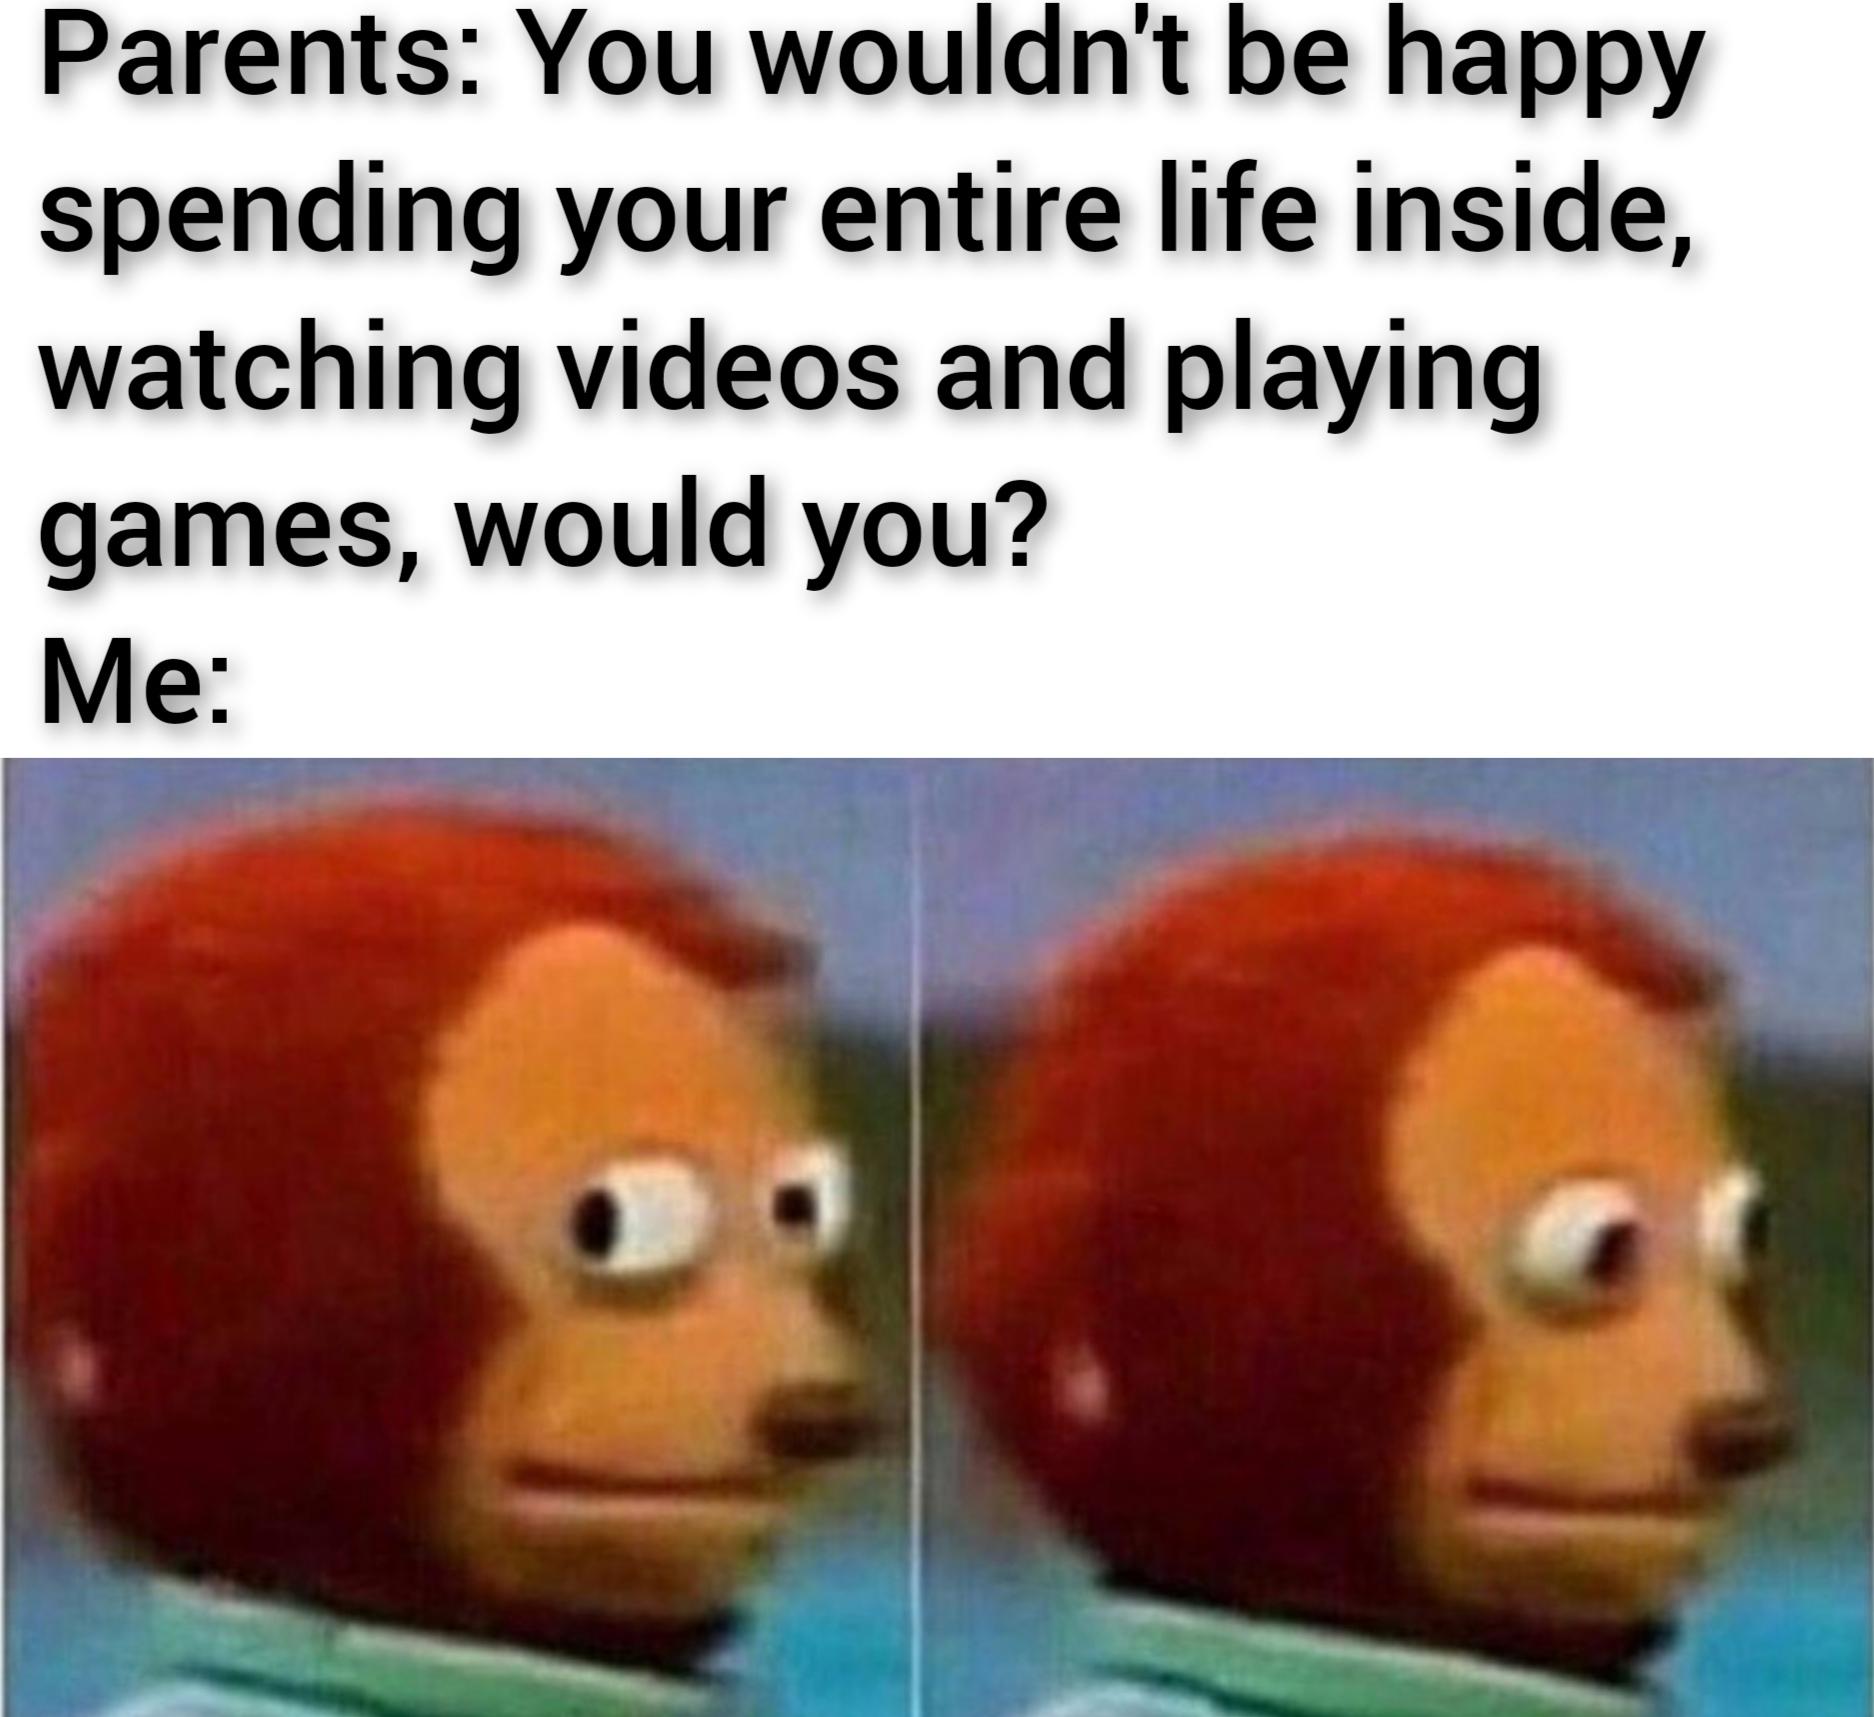 gaming memes - masturbaton memes - Parents You wouldn't be happy spending your entire life inside, watching videos and playing games, would you? Me